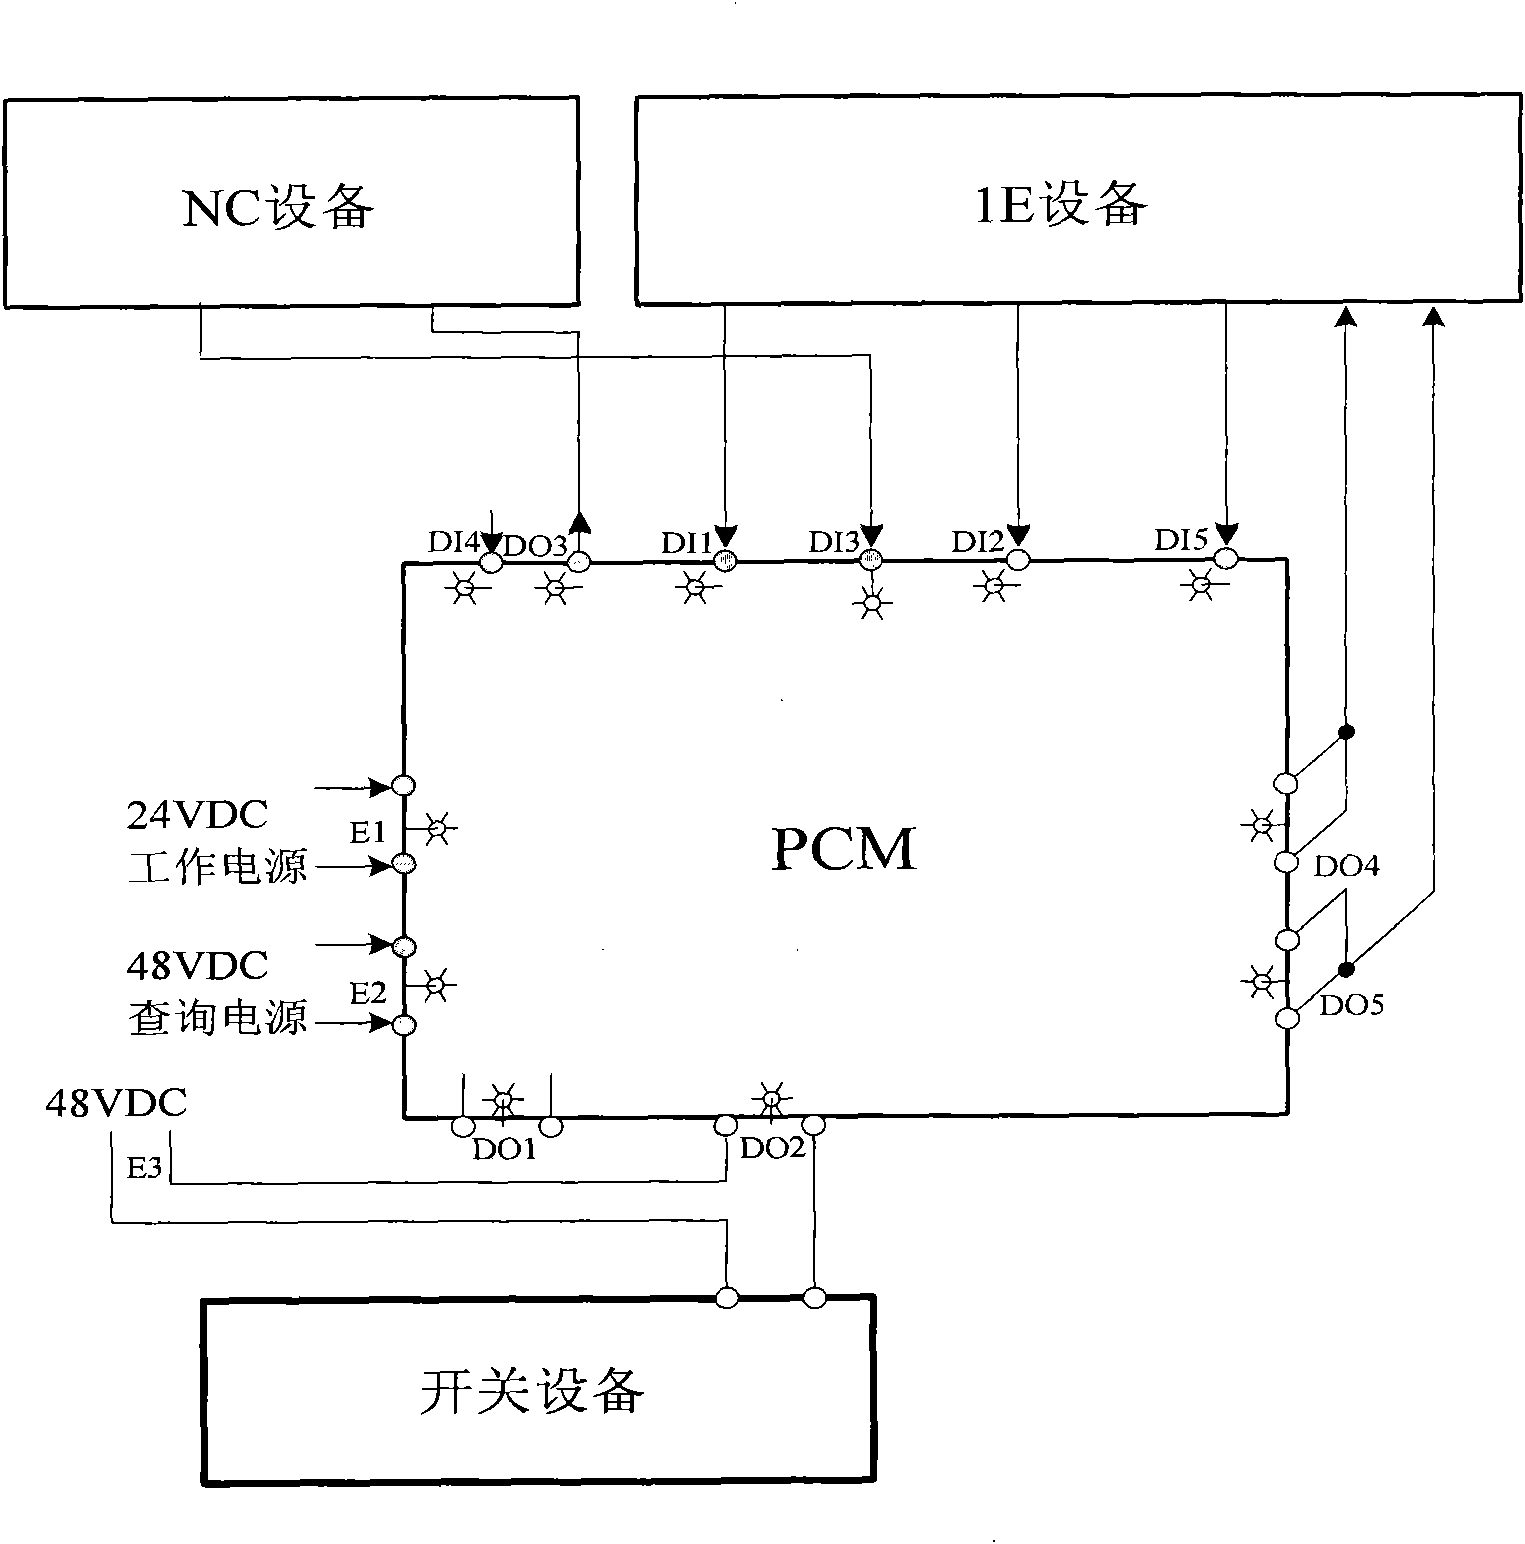 Relay module with priority control function